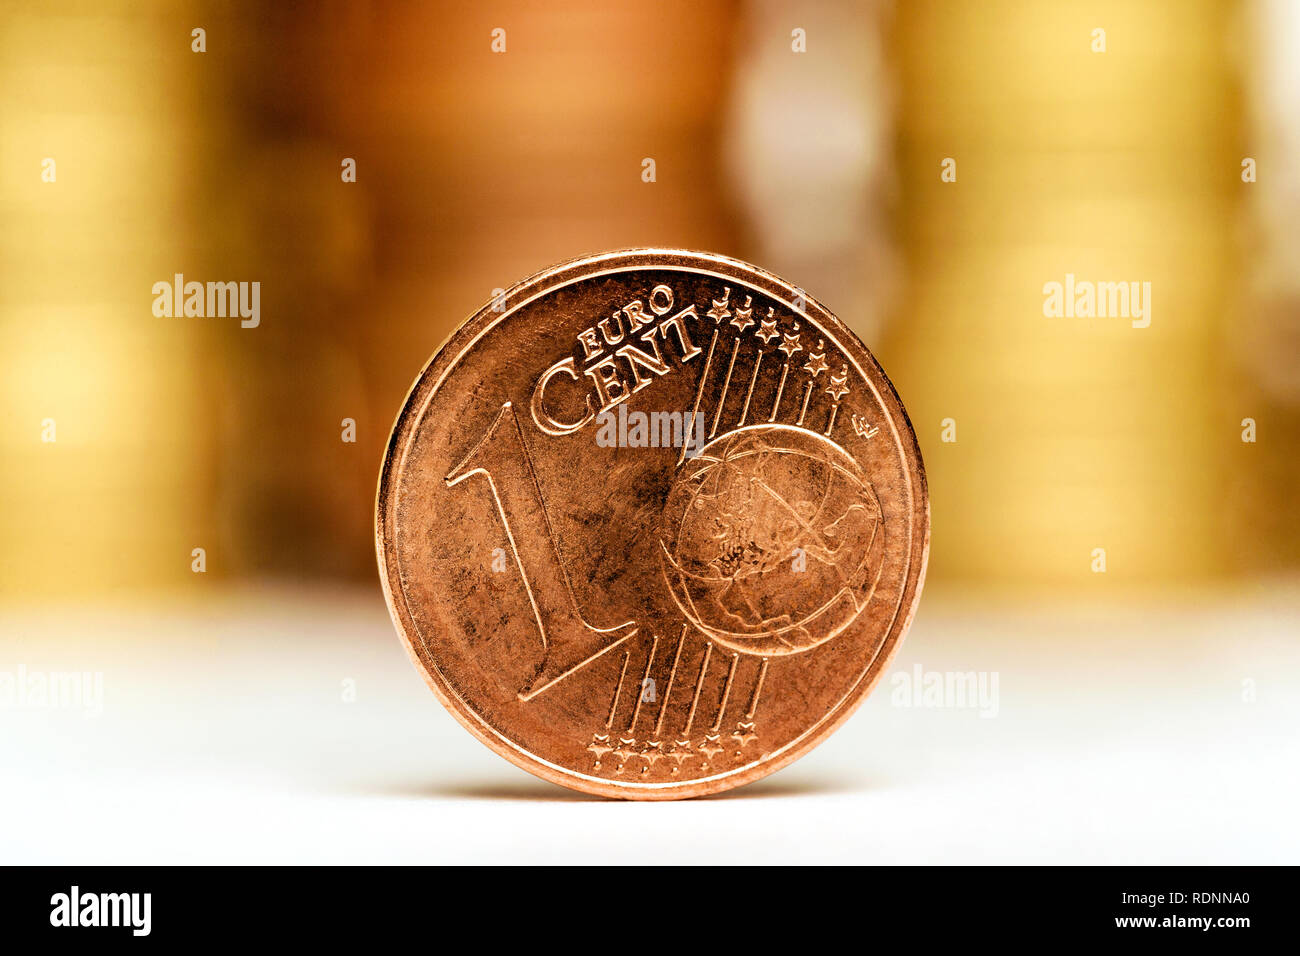 Close up of One Euro Cent and piles of coins on a white background Stock Photo